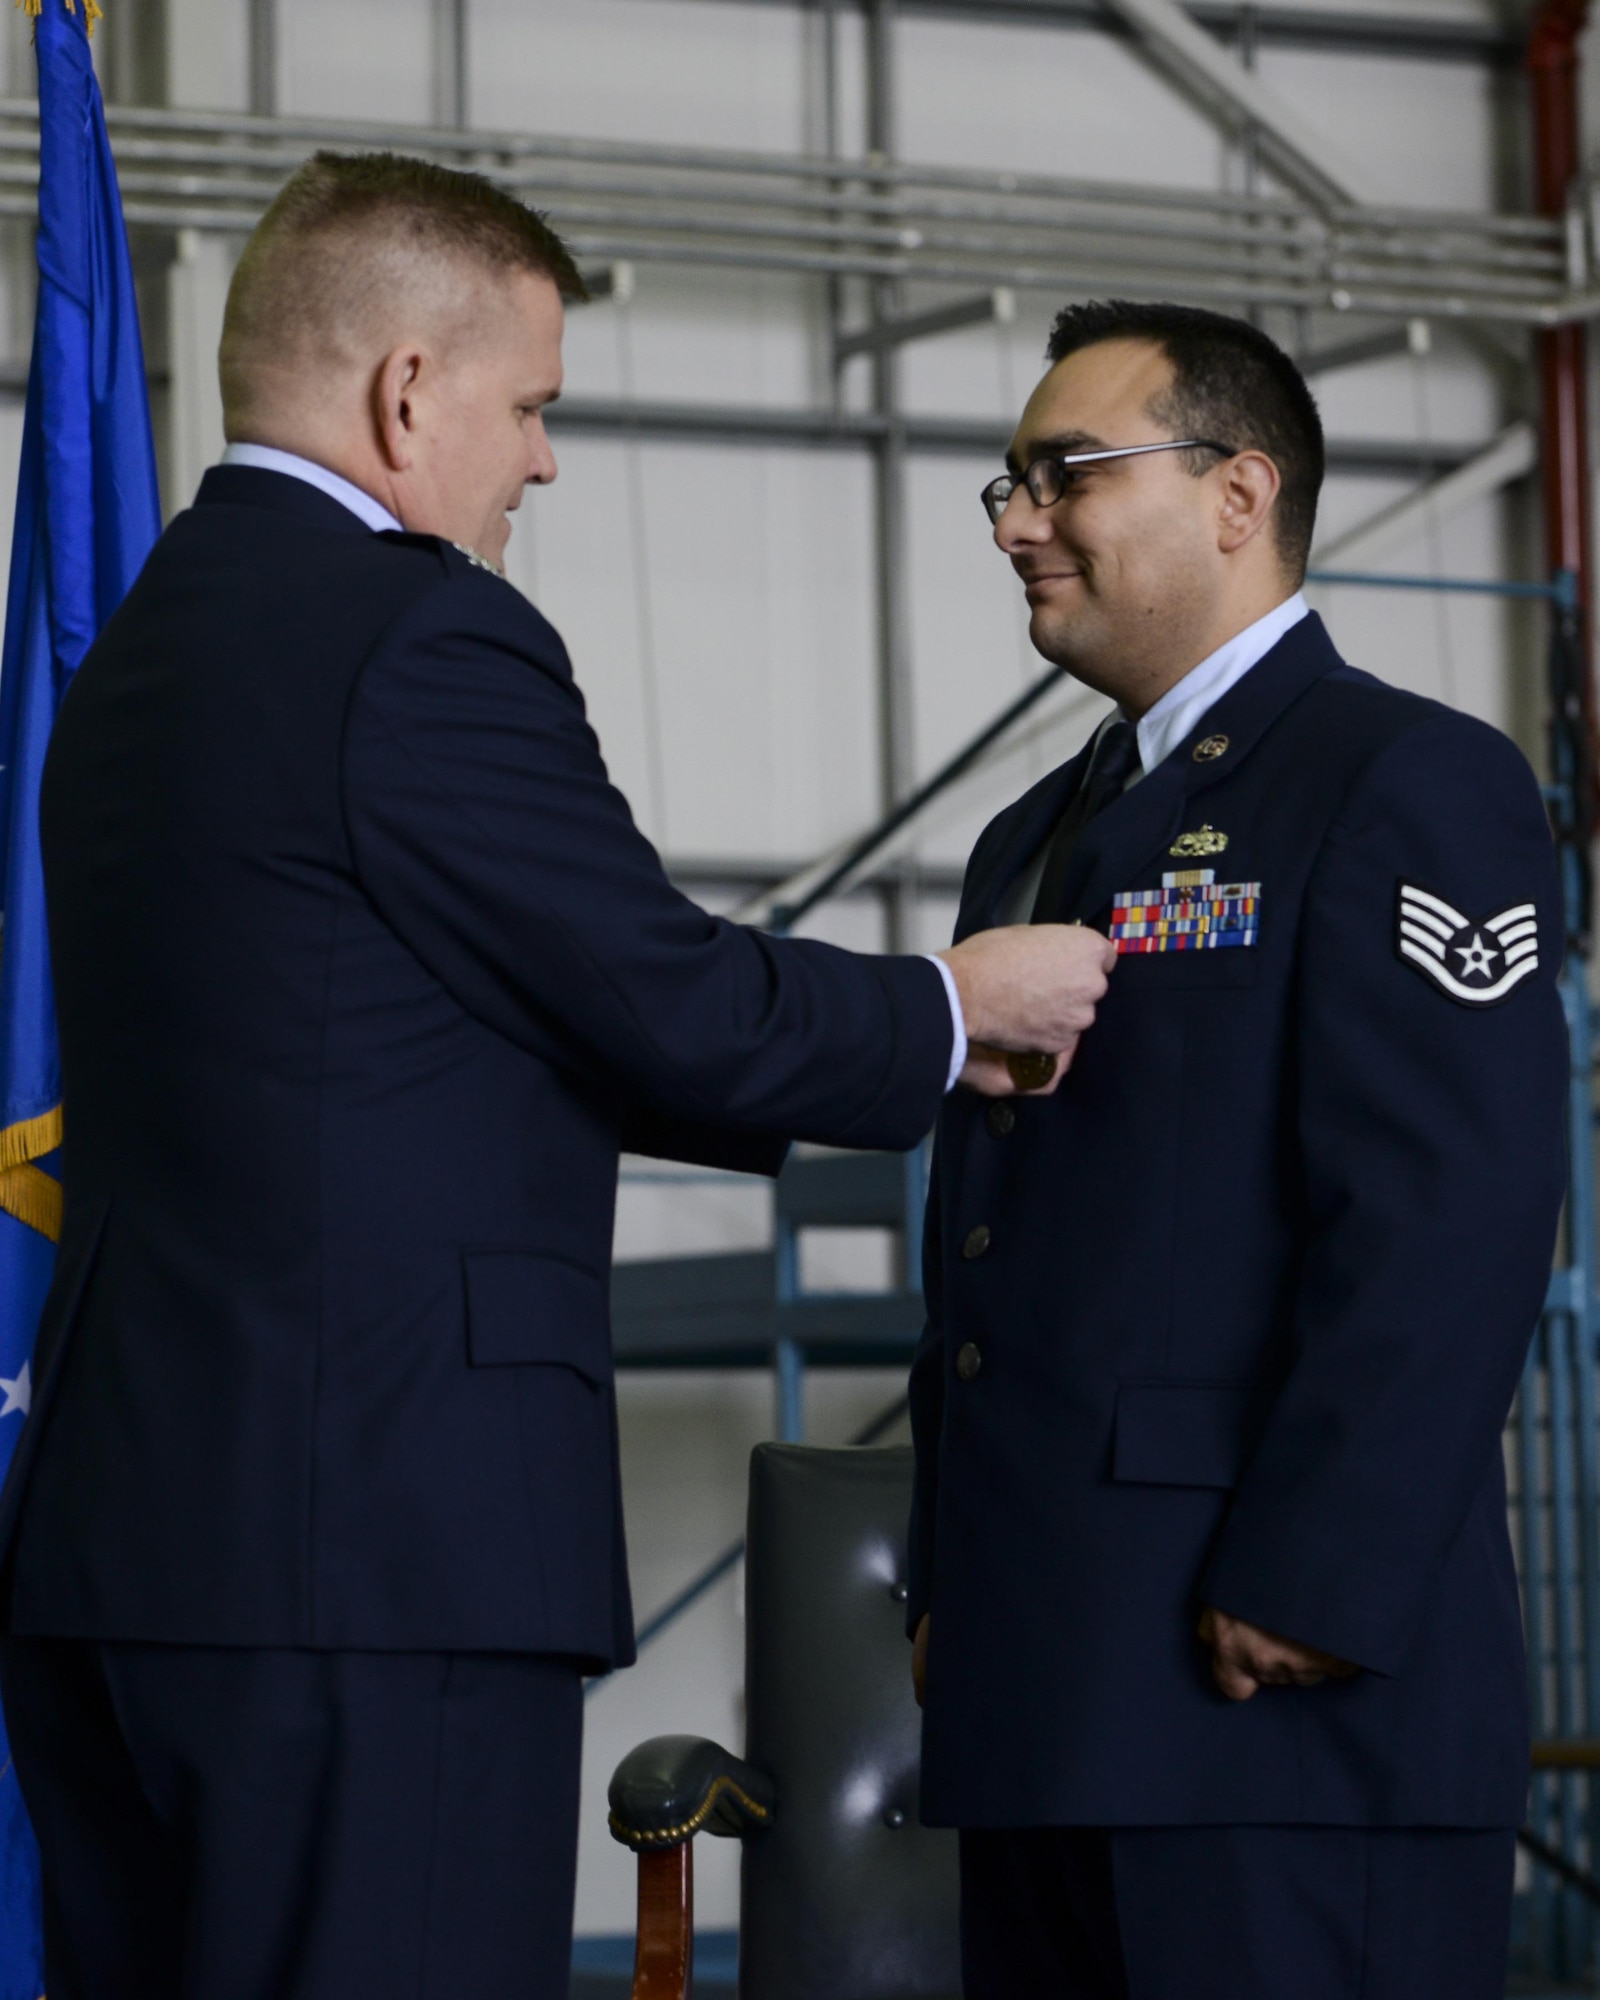 Col. Thomas D. Torkelson, the 100th Air Refueling Wing commander, presents Staff Sgt. Vicente Gomez, a 100th Aircraft Maintenance Squadron crew chief, with the Airman’s Medal during a ceremony March 11, 2016, on Royal Air Force Mildenhall, England. Gomez received the honor for his courageous acts performed on May 12, 2014 by saving the lives of two victims from a potentially fatal car accident. (U.S. Air Force photo/Senior Airman Victoria H. Taylor)